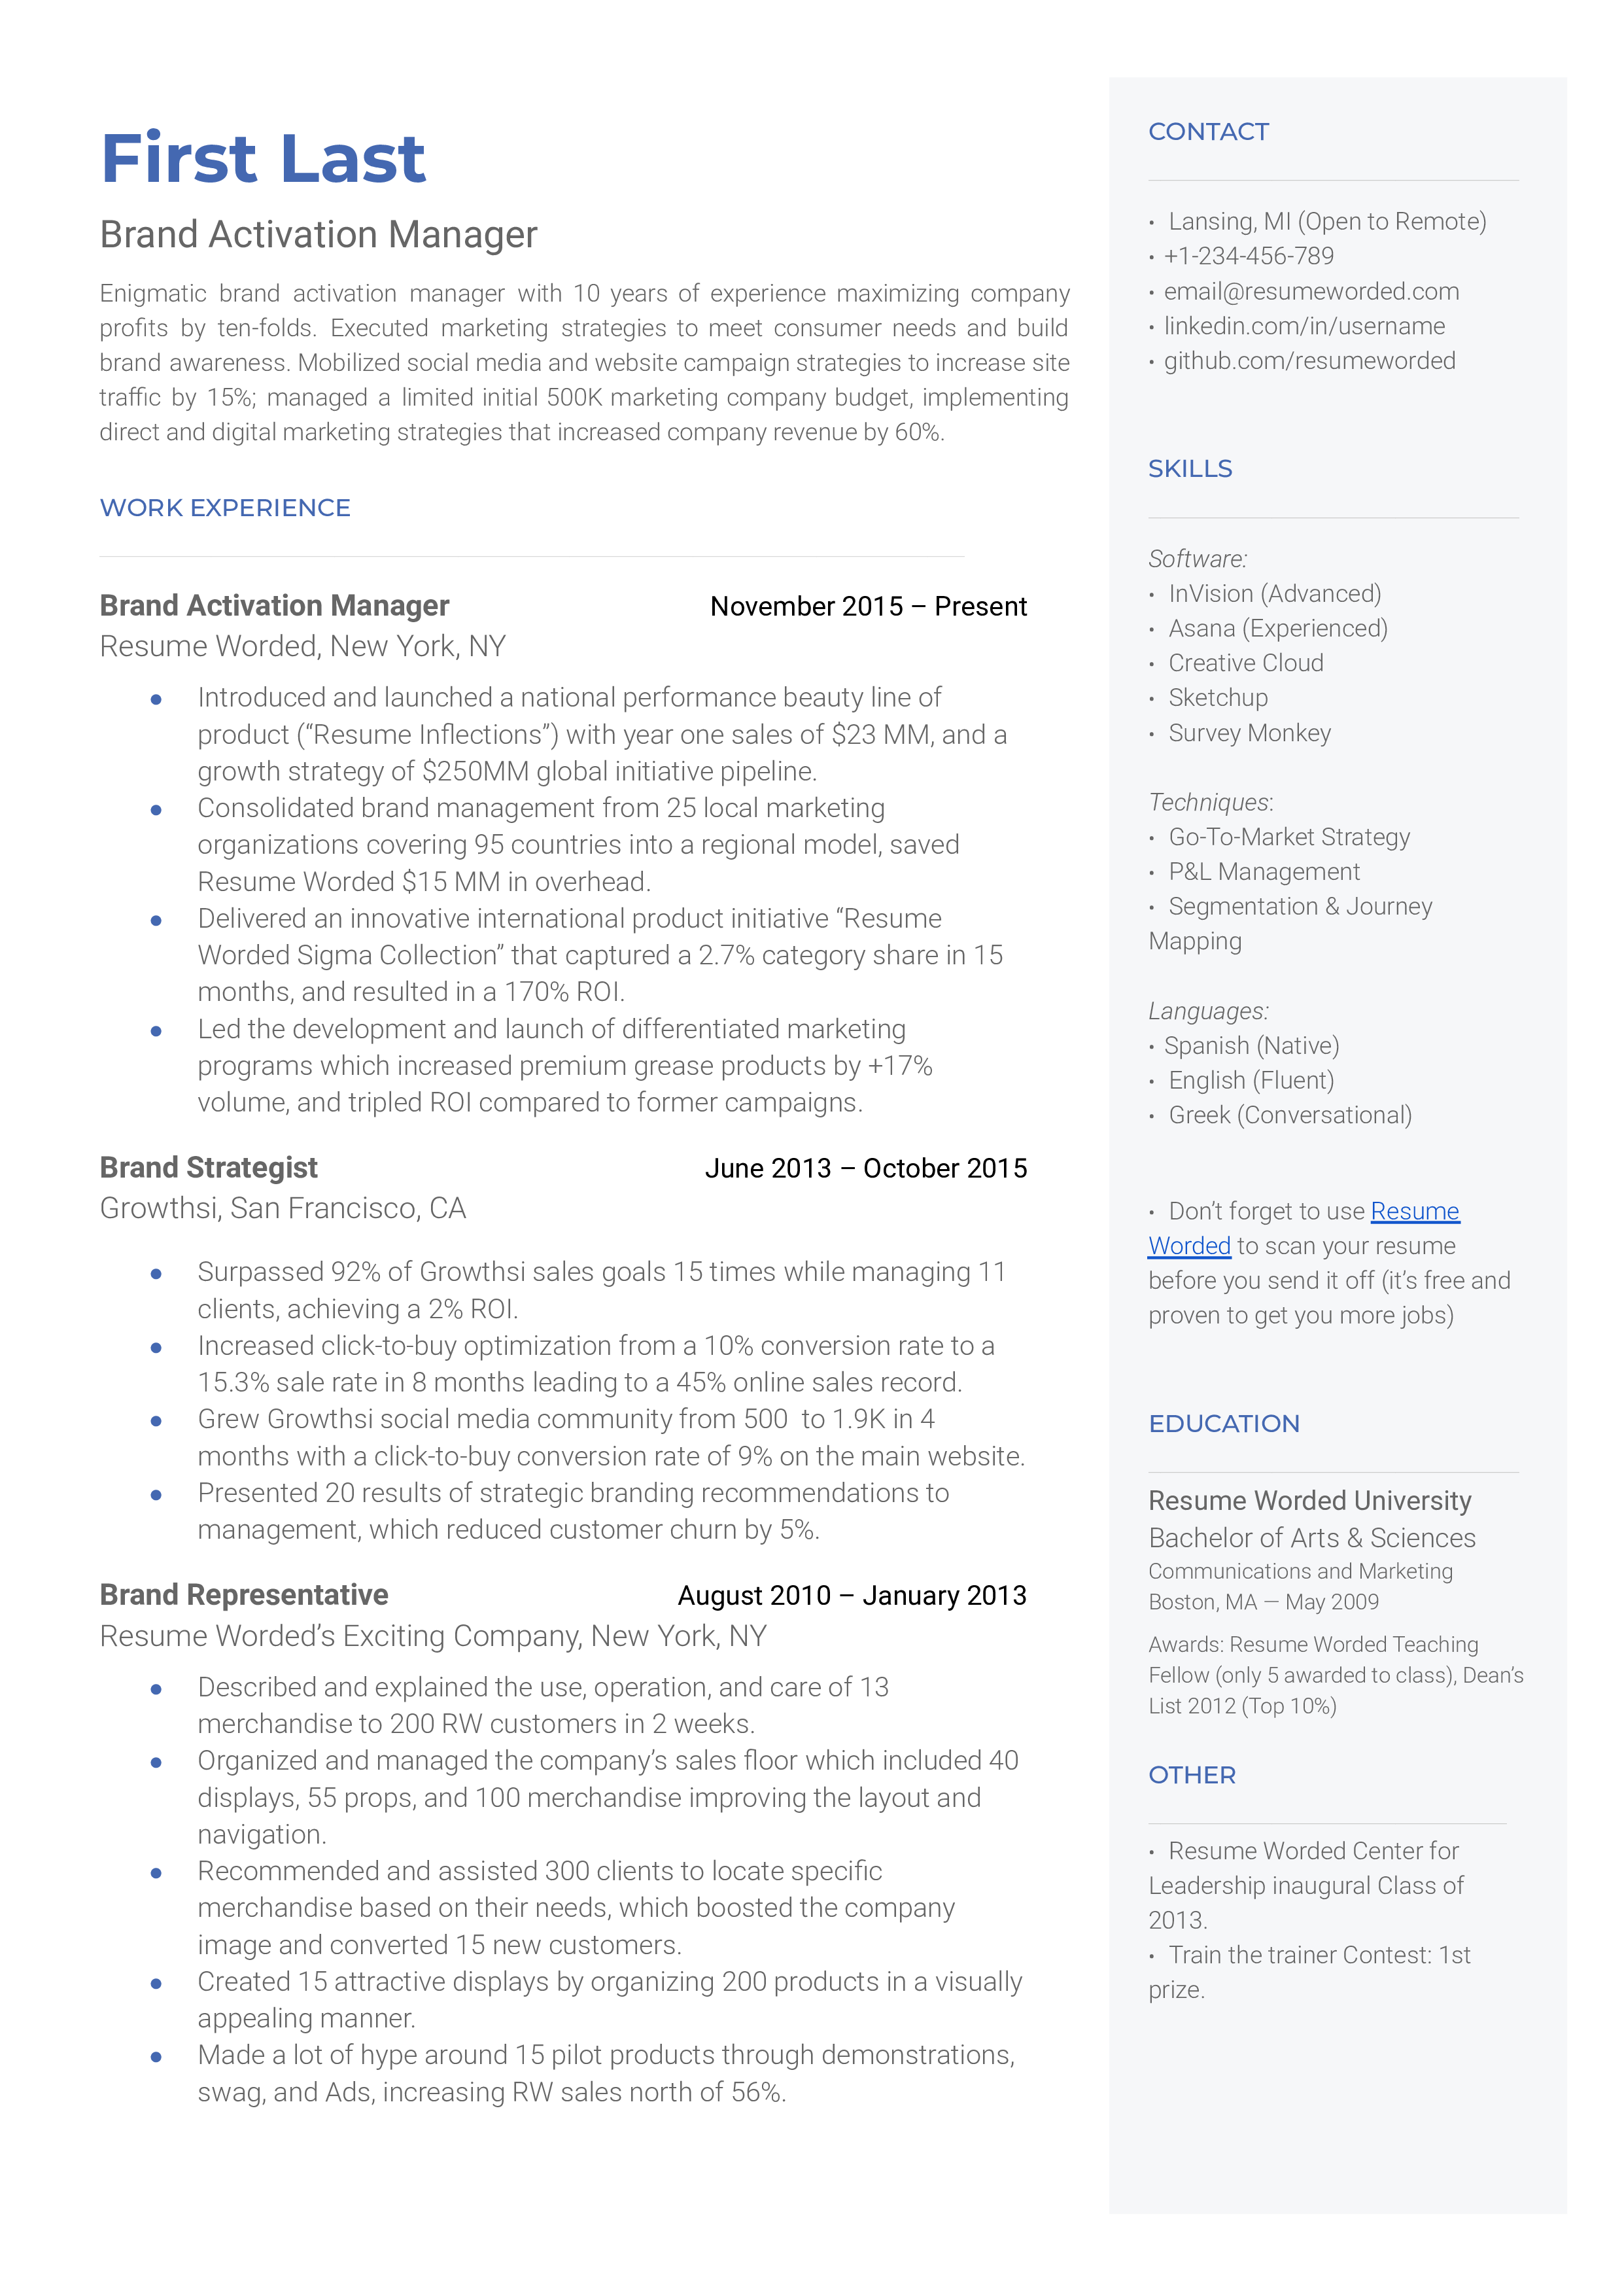 Brand Activation Manager Resume Sample